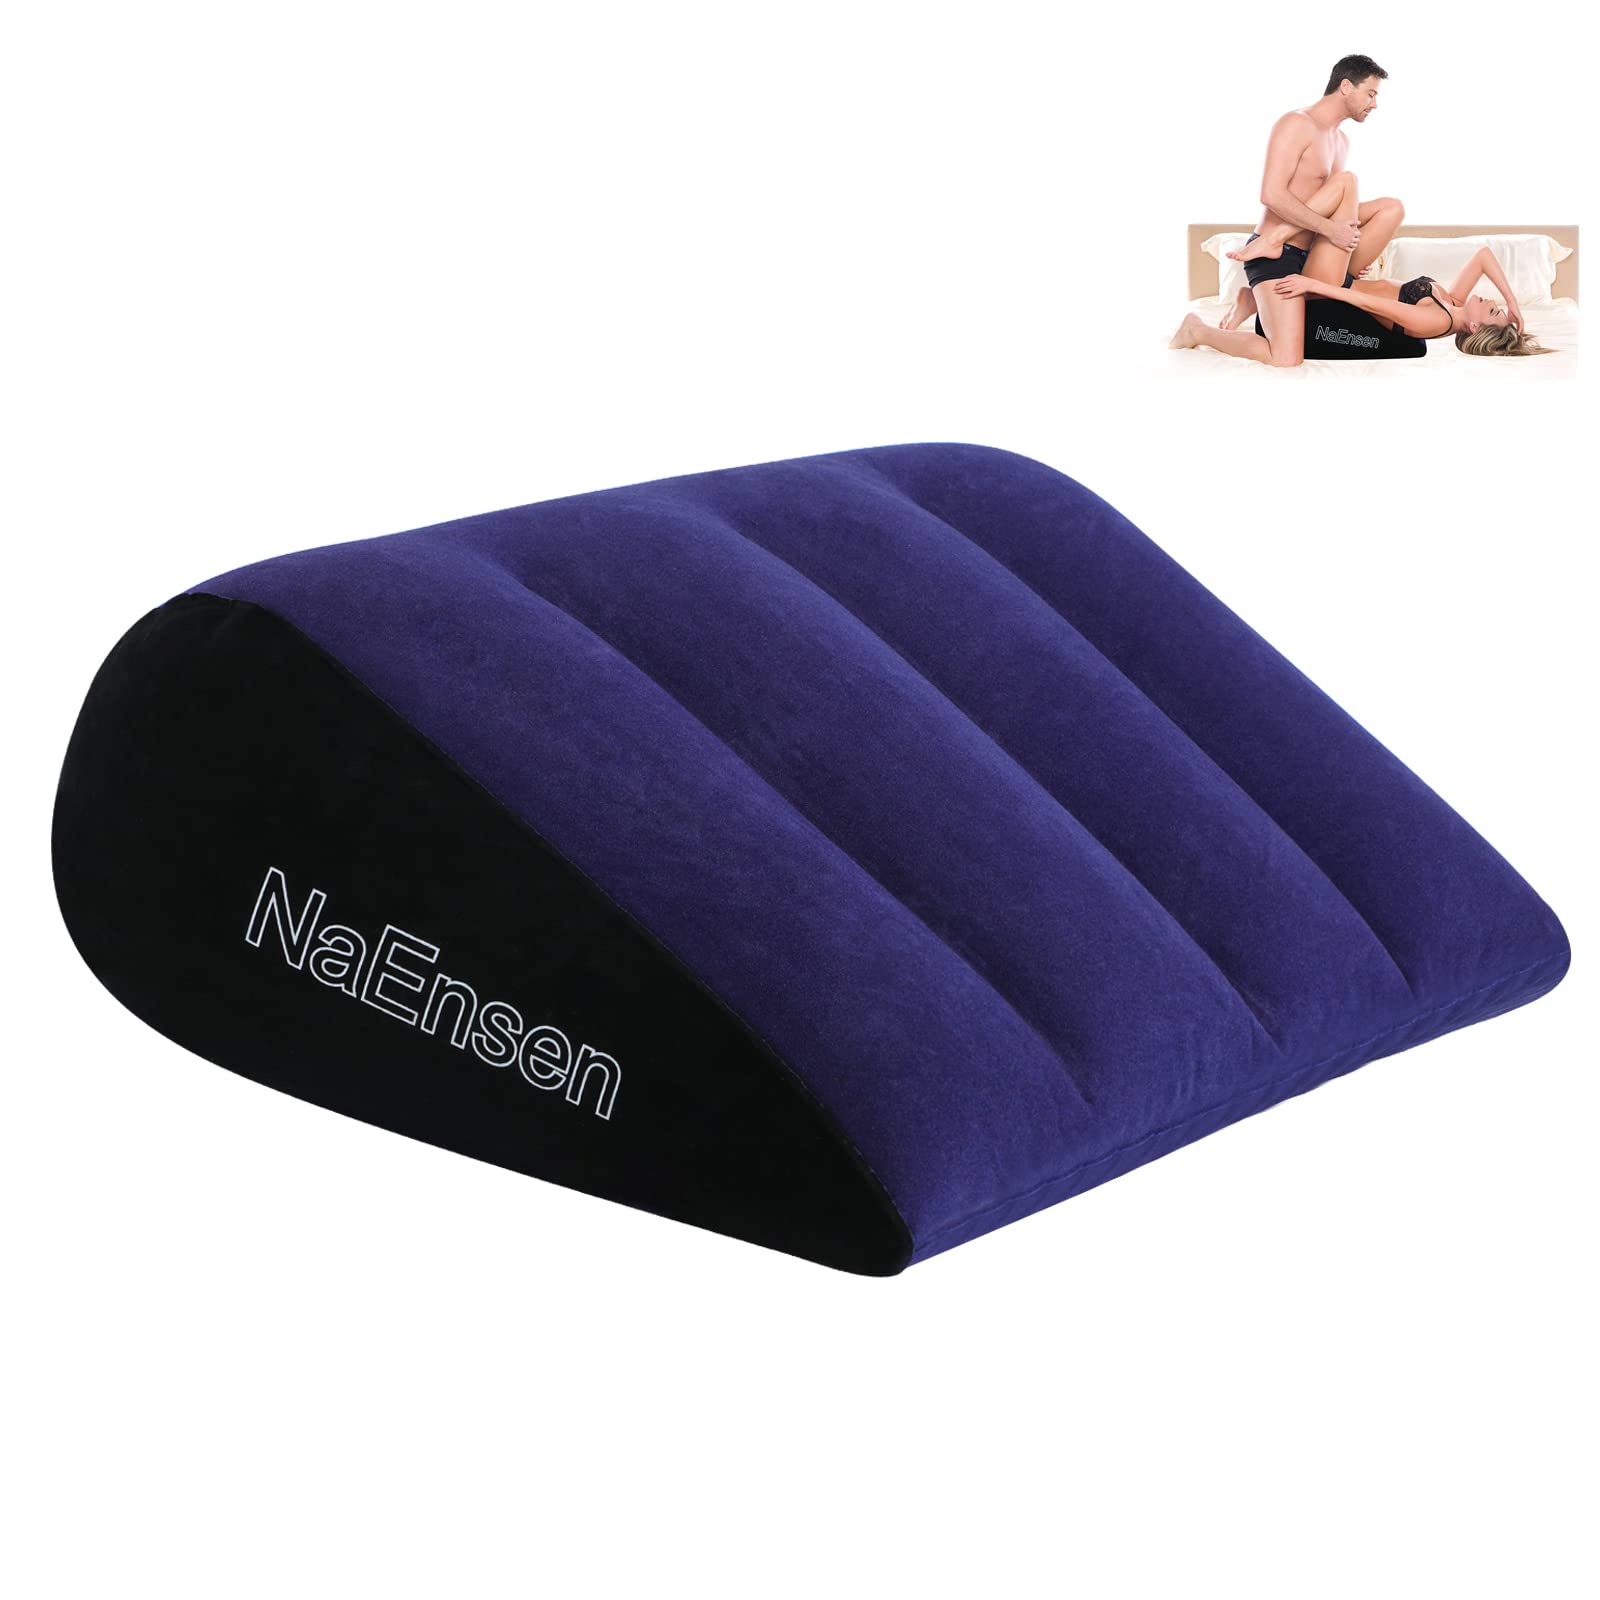 Naensen Sex Toys Wedge Pillow Position Cushion Triangle Inflatable Ramp 3888